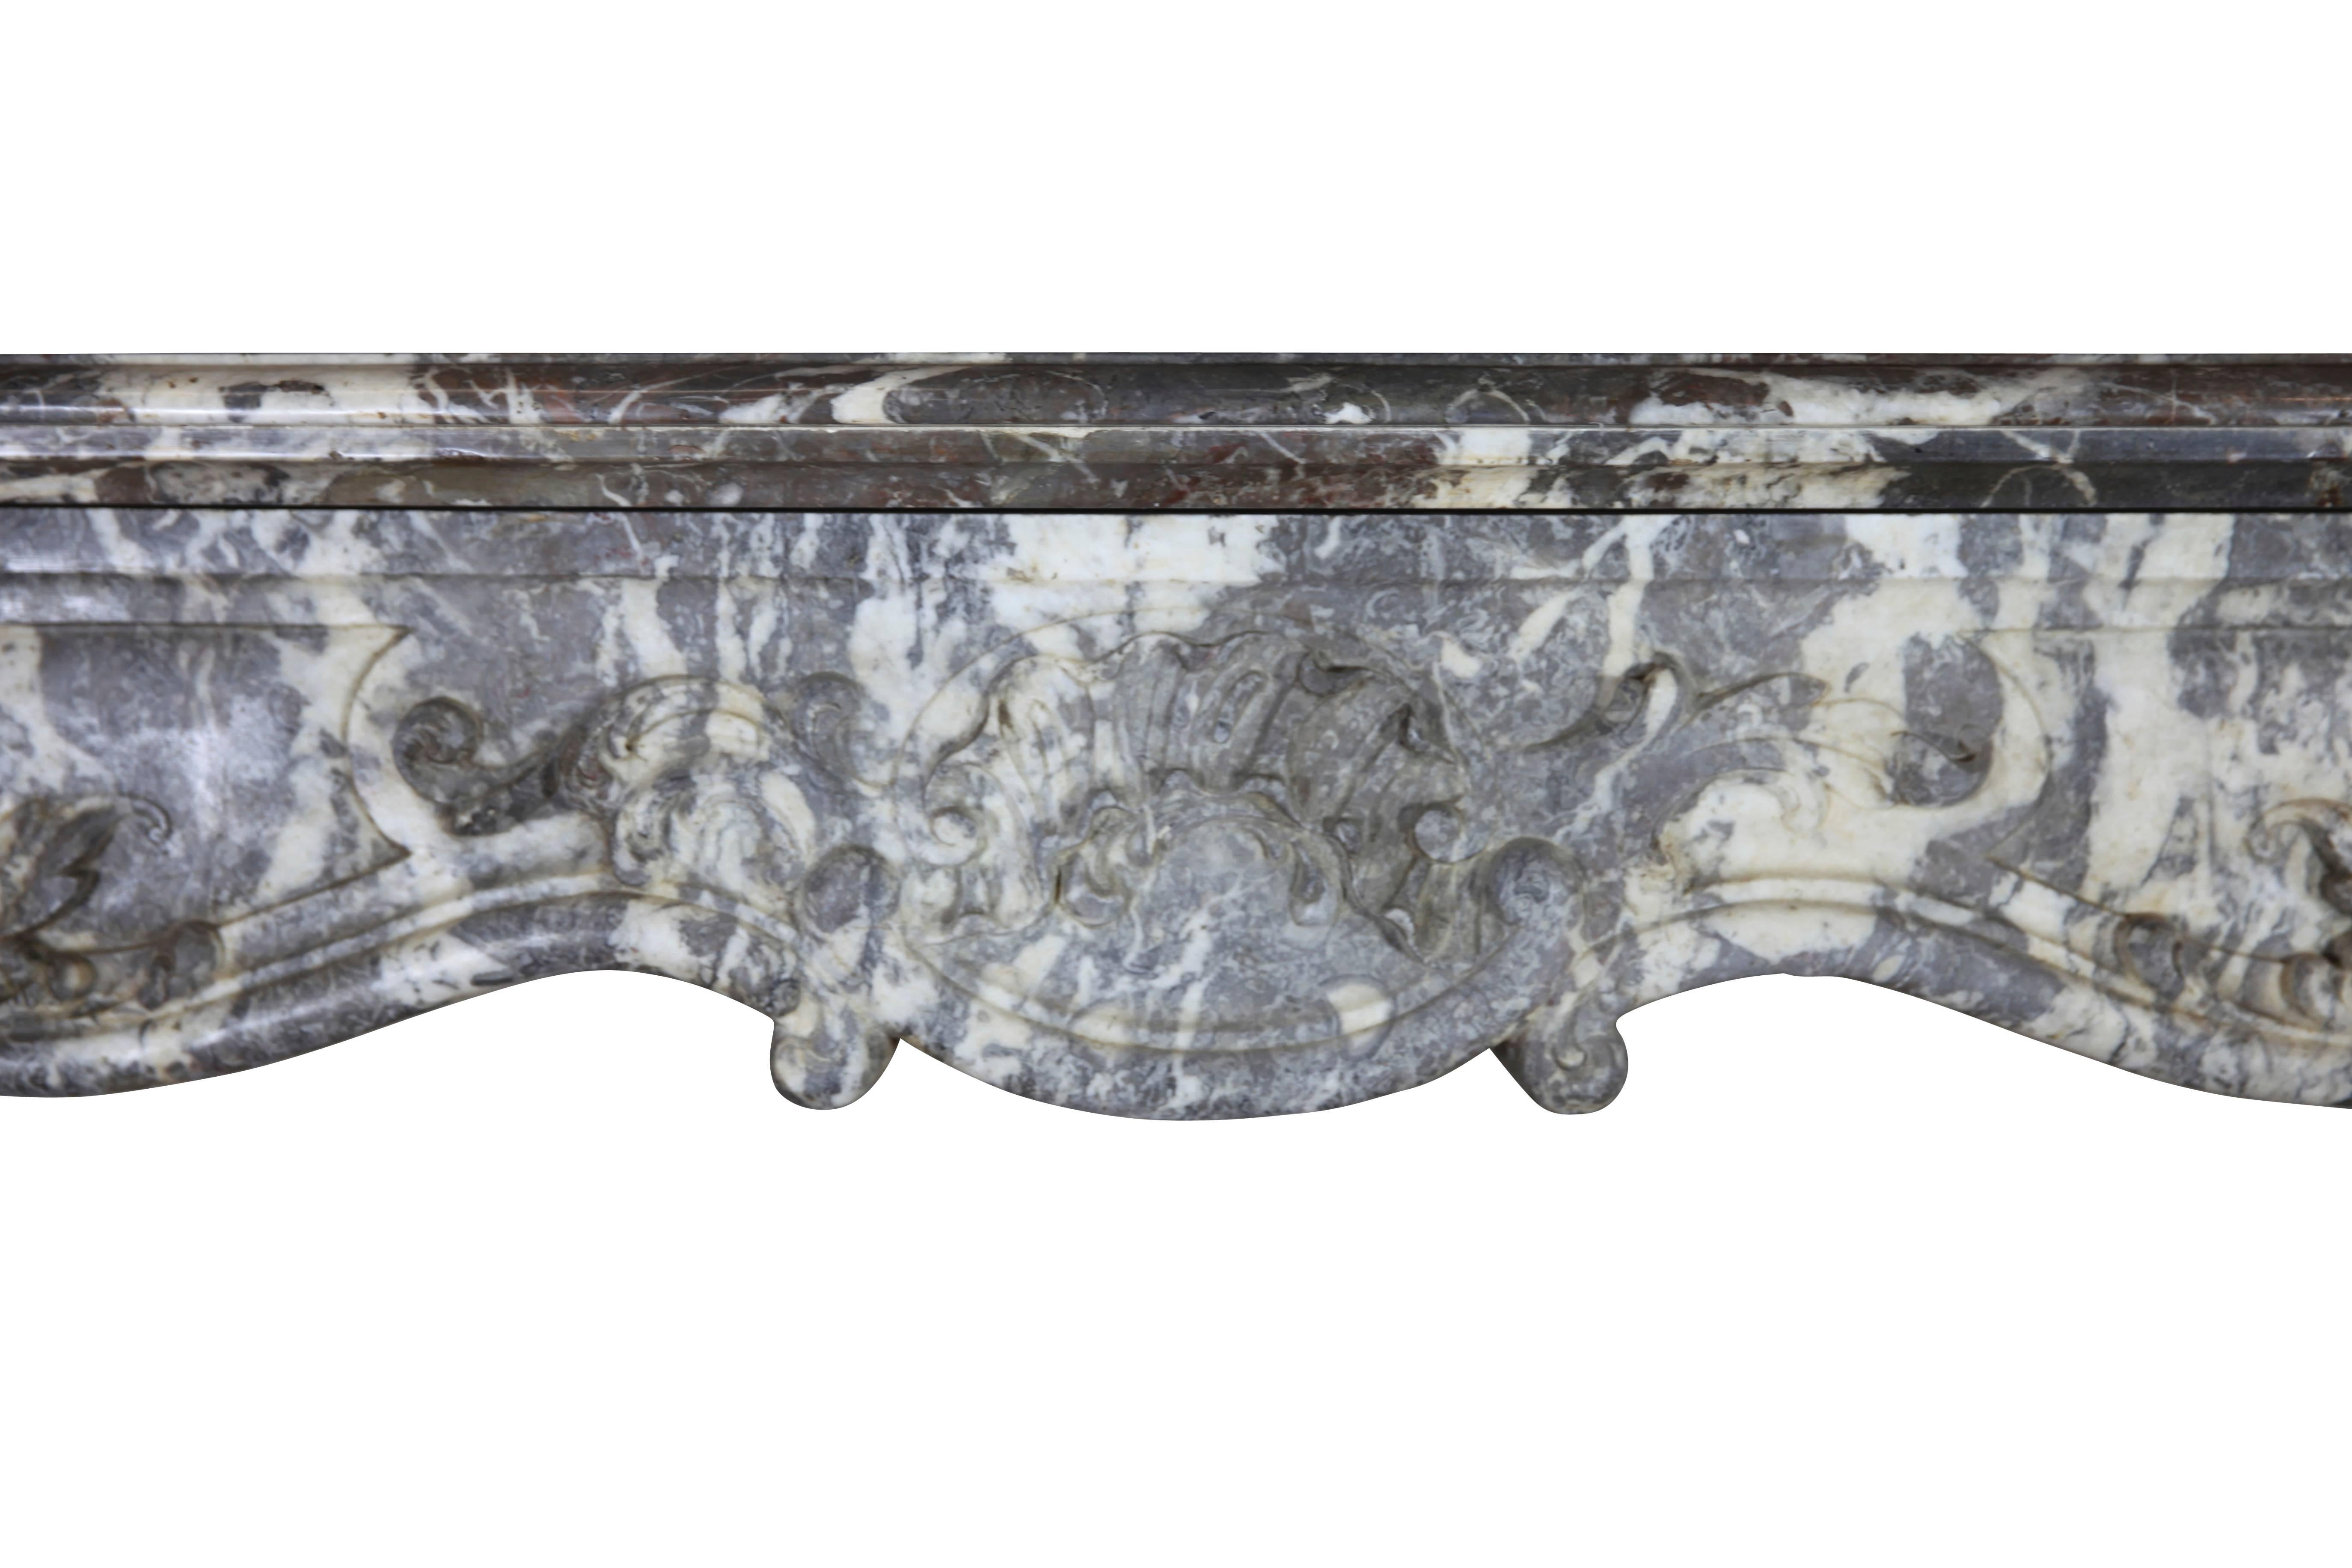 This 19th century marble fireplace surround is very unique and in perfect condition. Its lines and its form have very nice movement. Very pure for a bespoke and elegant interior.
Measures:
166 cm EW 65.35”
114 cm EH 44.88”
120 cm IW 47.24”
97